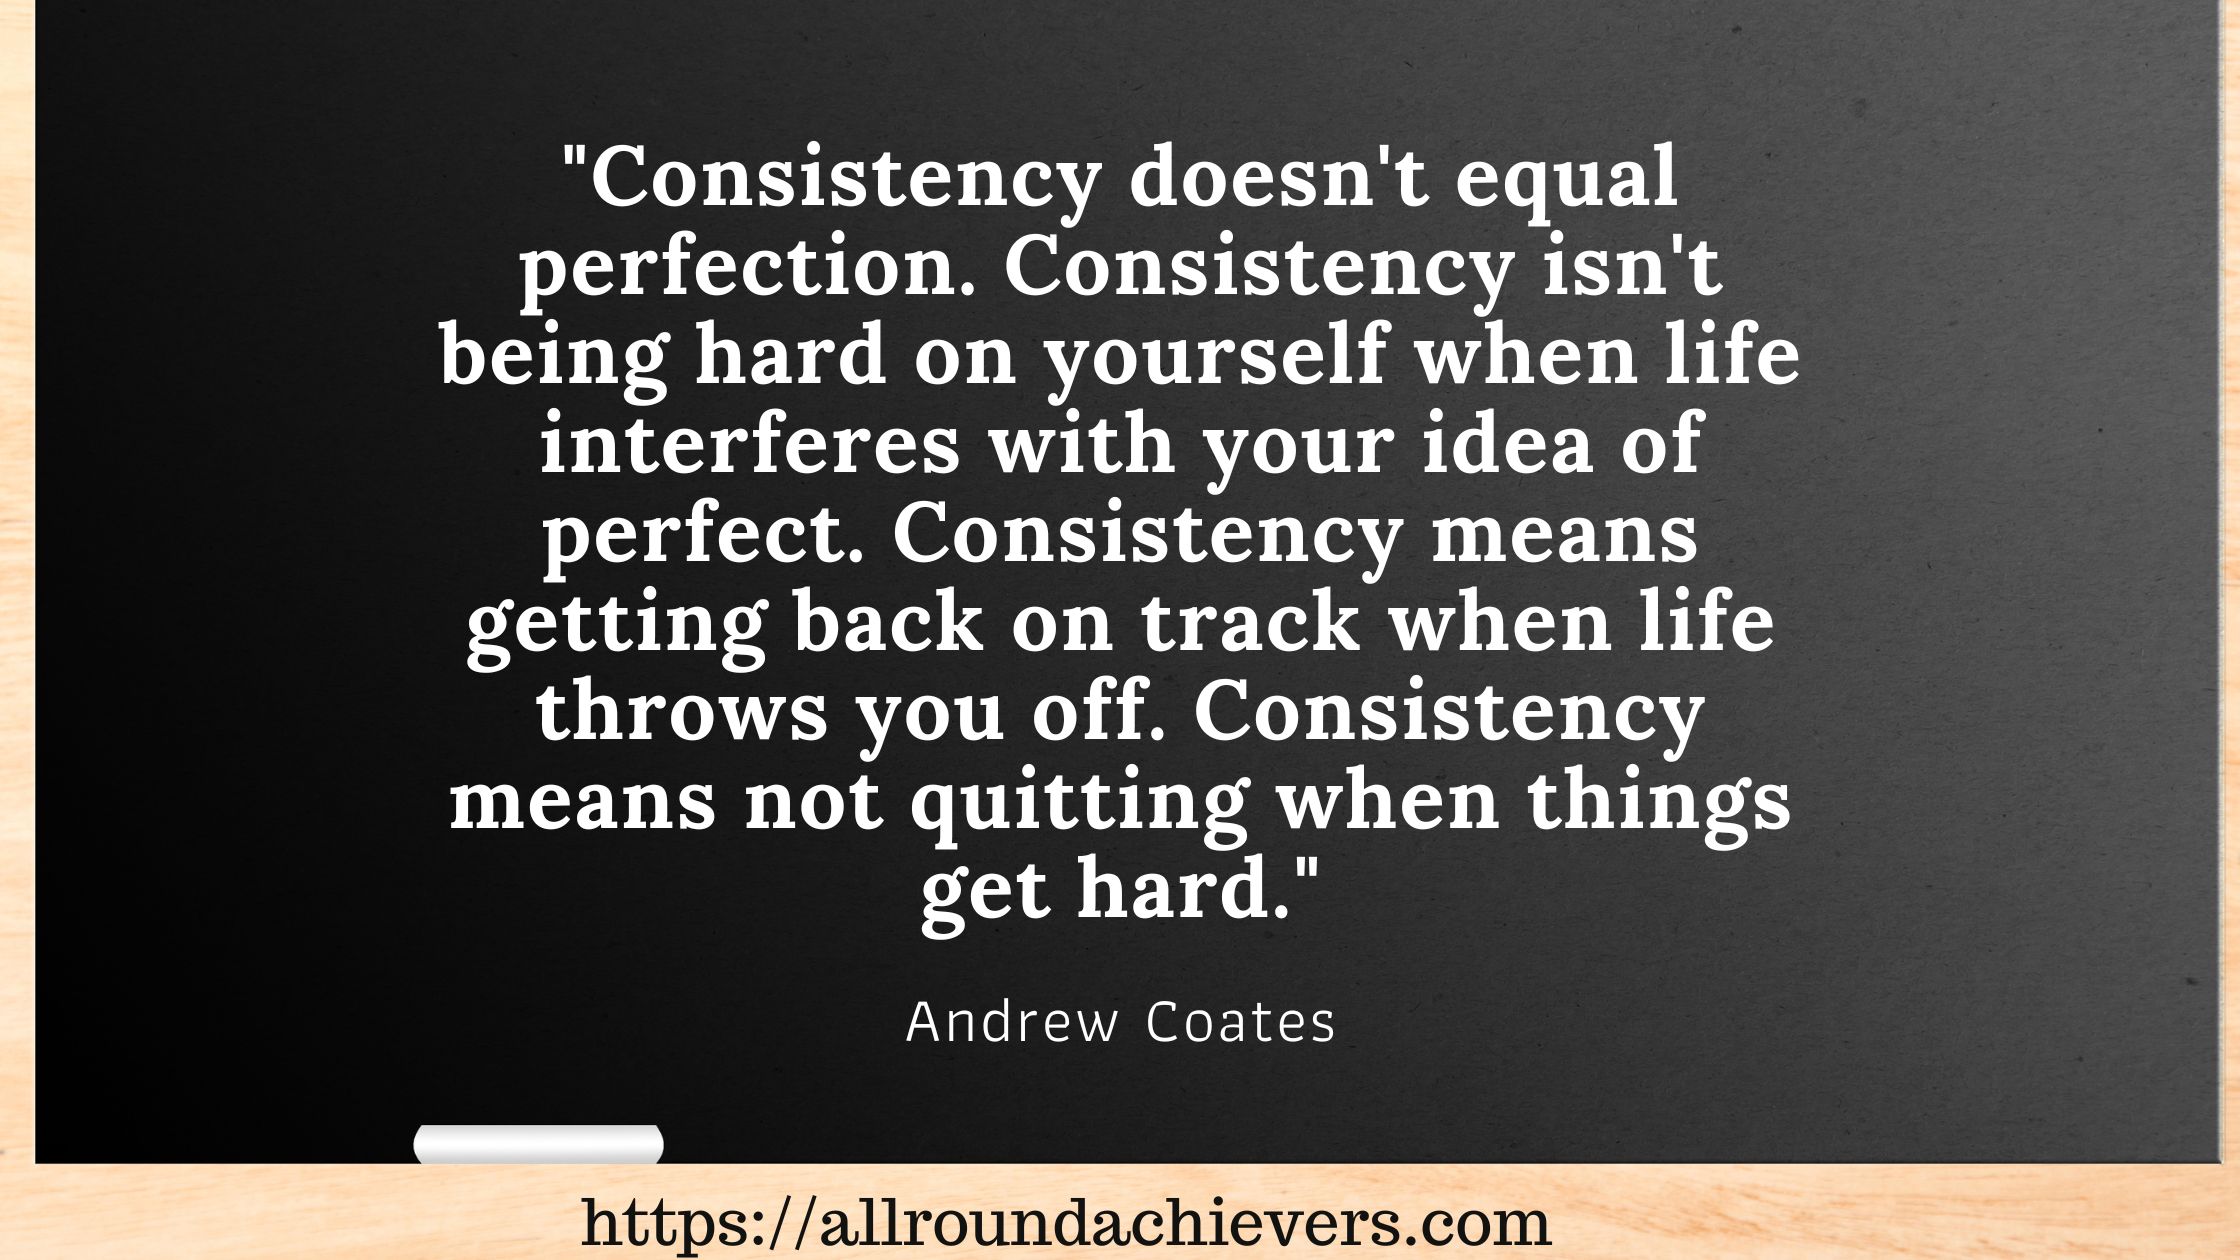 what does it mean to be consistent?